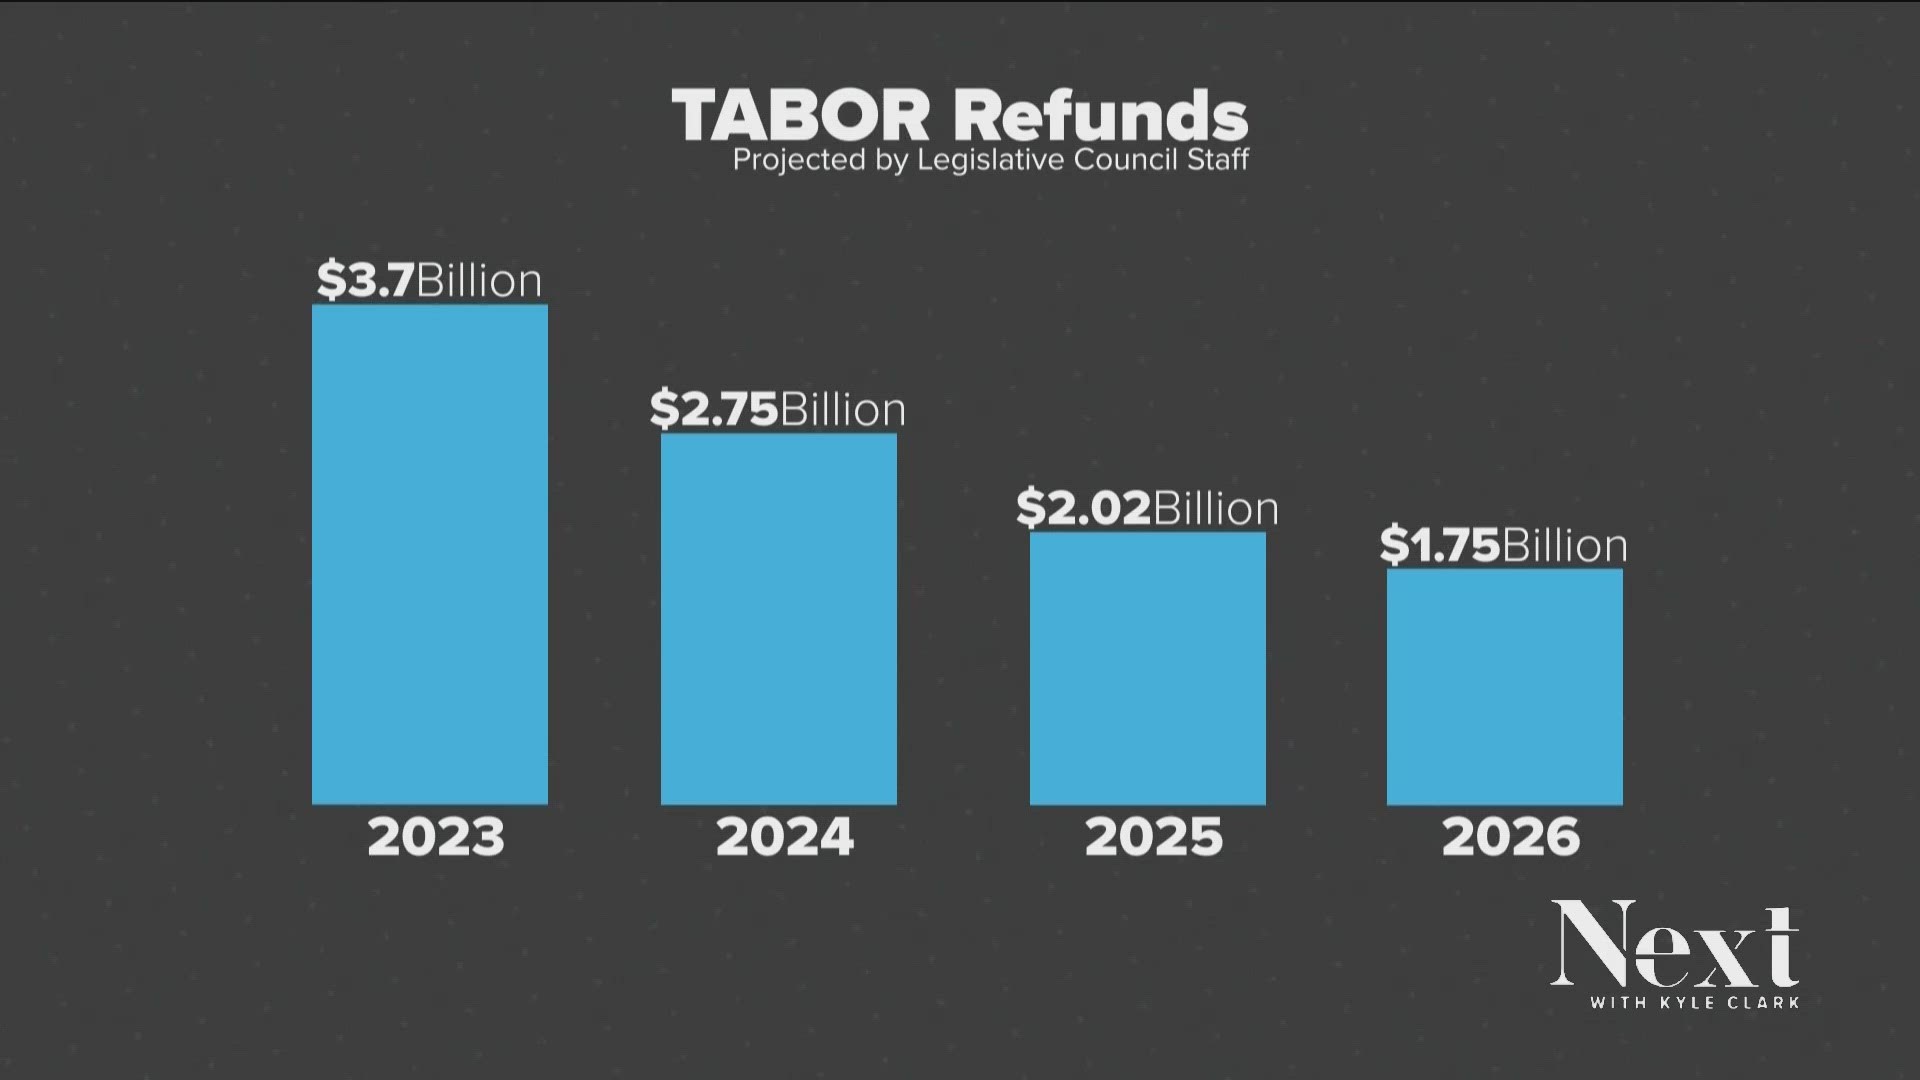 Coloradans could get more than $2.7 billion in TABOR refunds next year, though state economists say refunds are expected to shrink over the next few years.